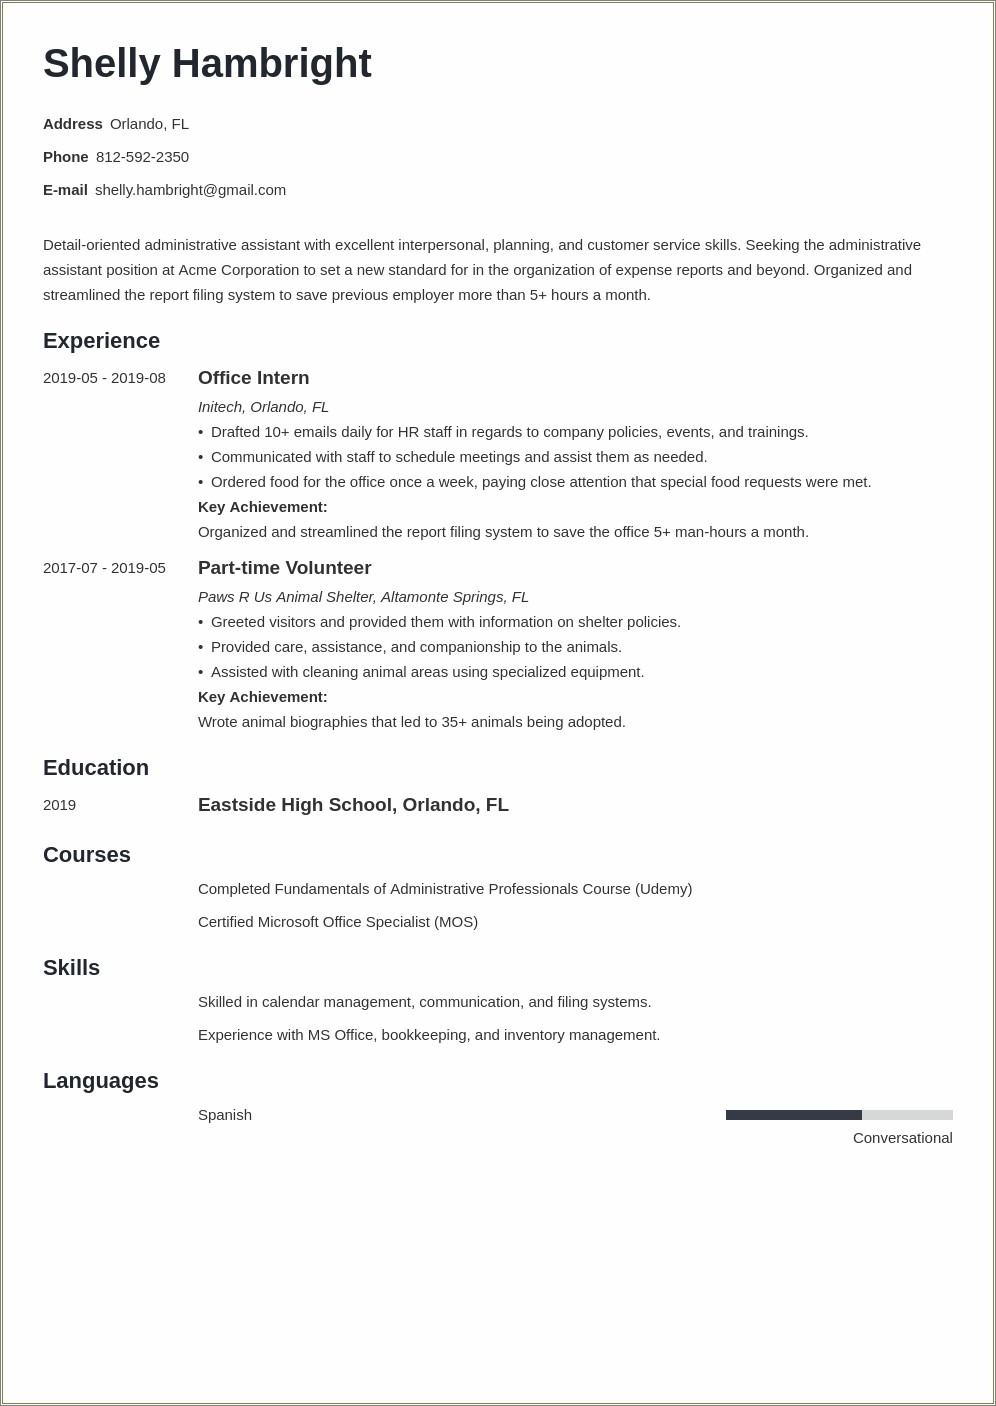 Resume Objective For Entry Level Management Position